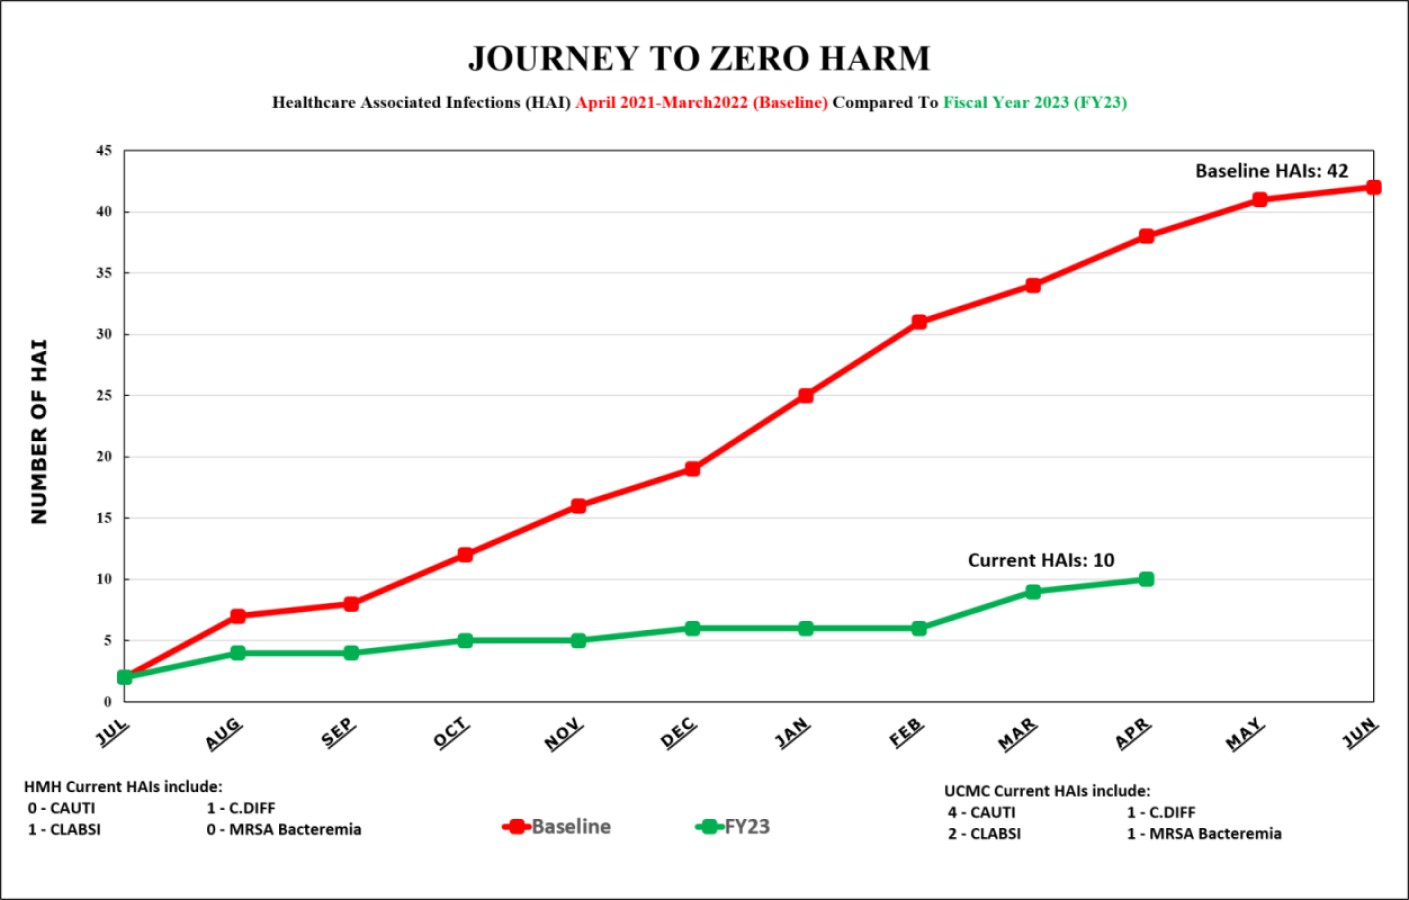 Journey to Zero Harm: Healthcare Associated Infections from April 2021-March 2022 compared to Fiscal Year 2023 at Upper Chesapeake Health